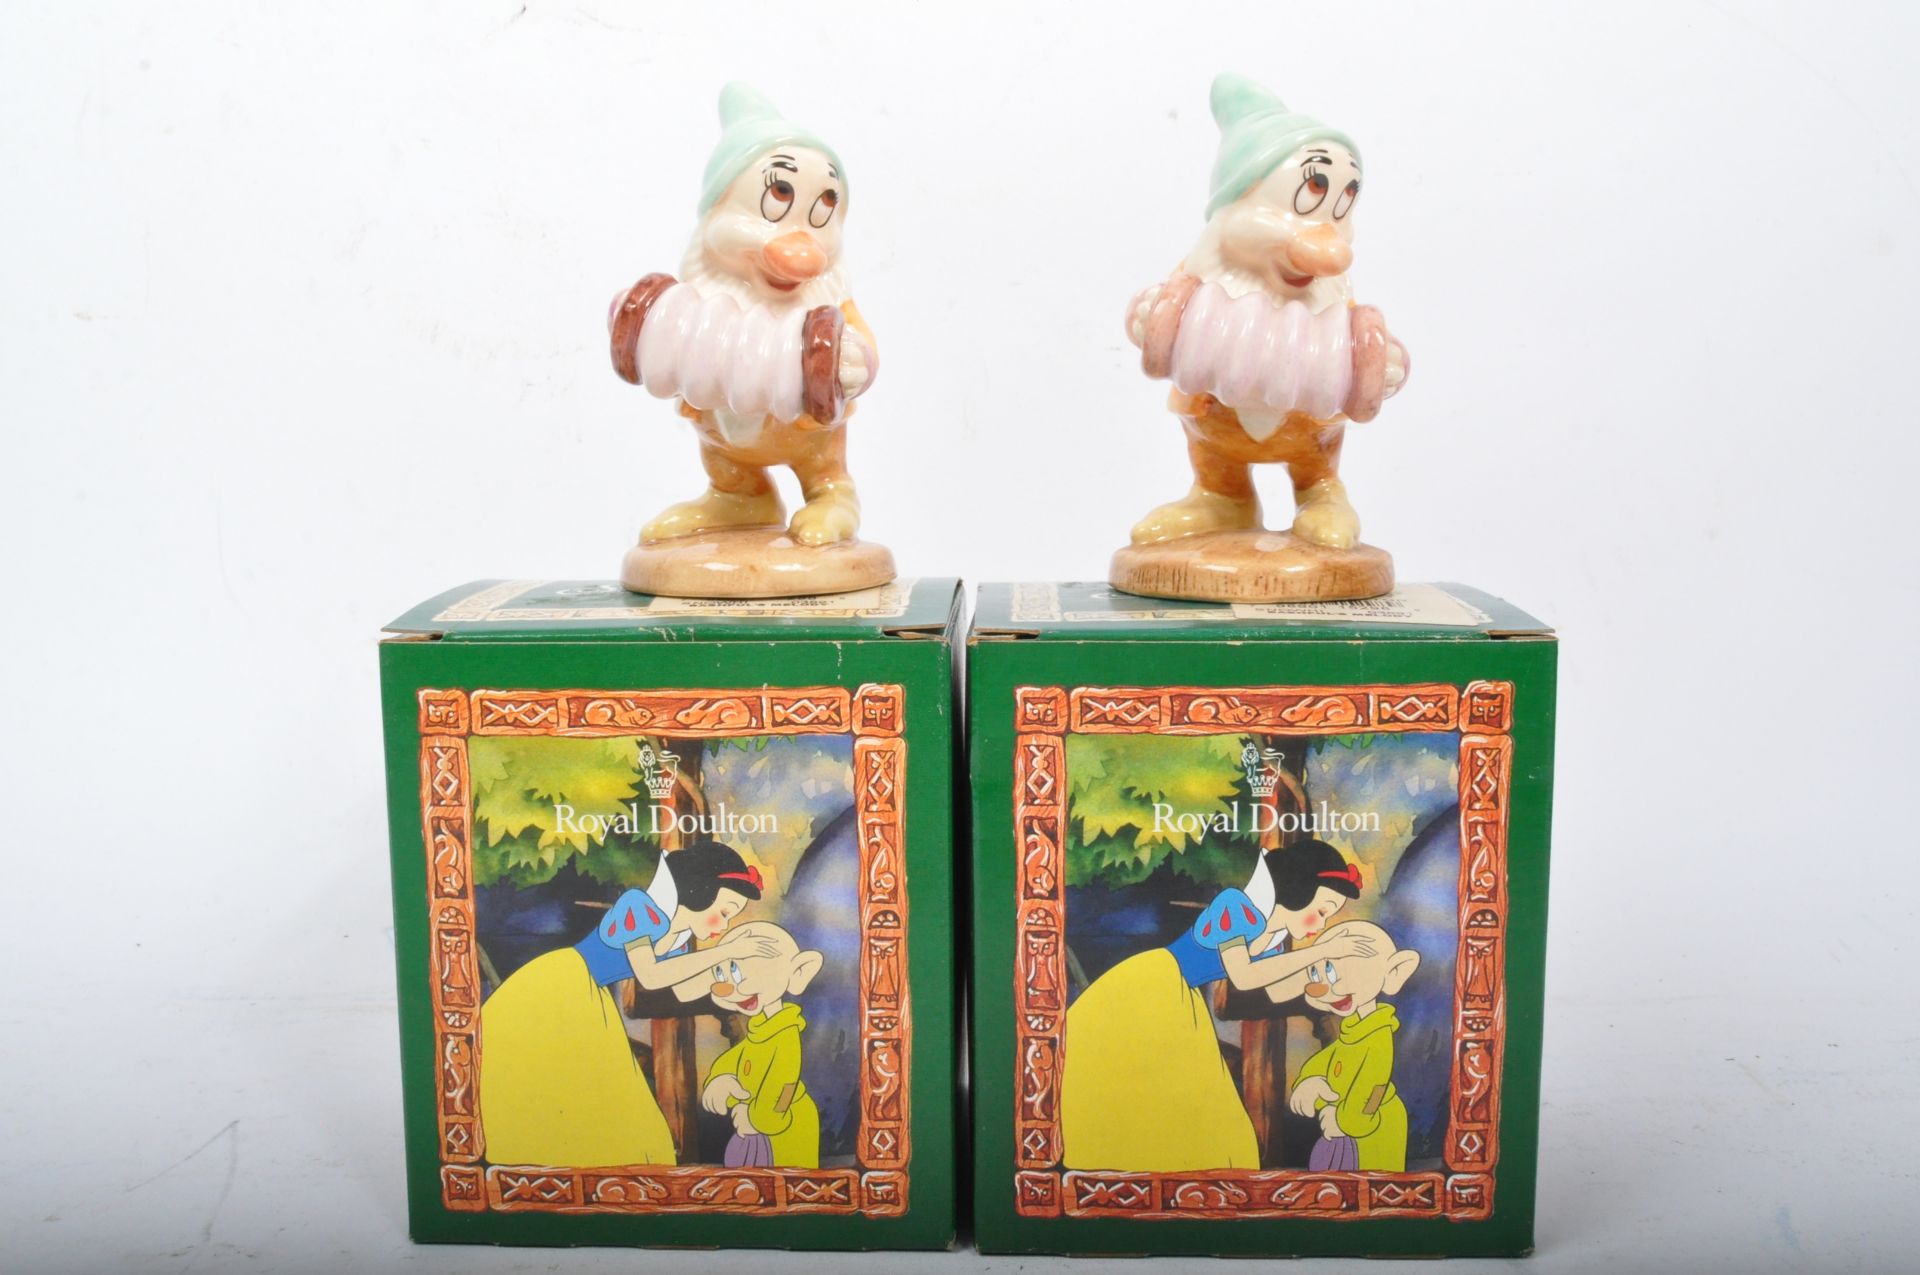 COLLECTION OF NOS BOXED FIGURINES - DISNEY - DOULTON - HUMMEL - Image 4 of 7